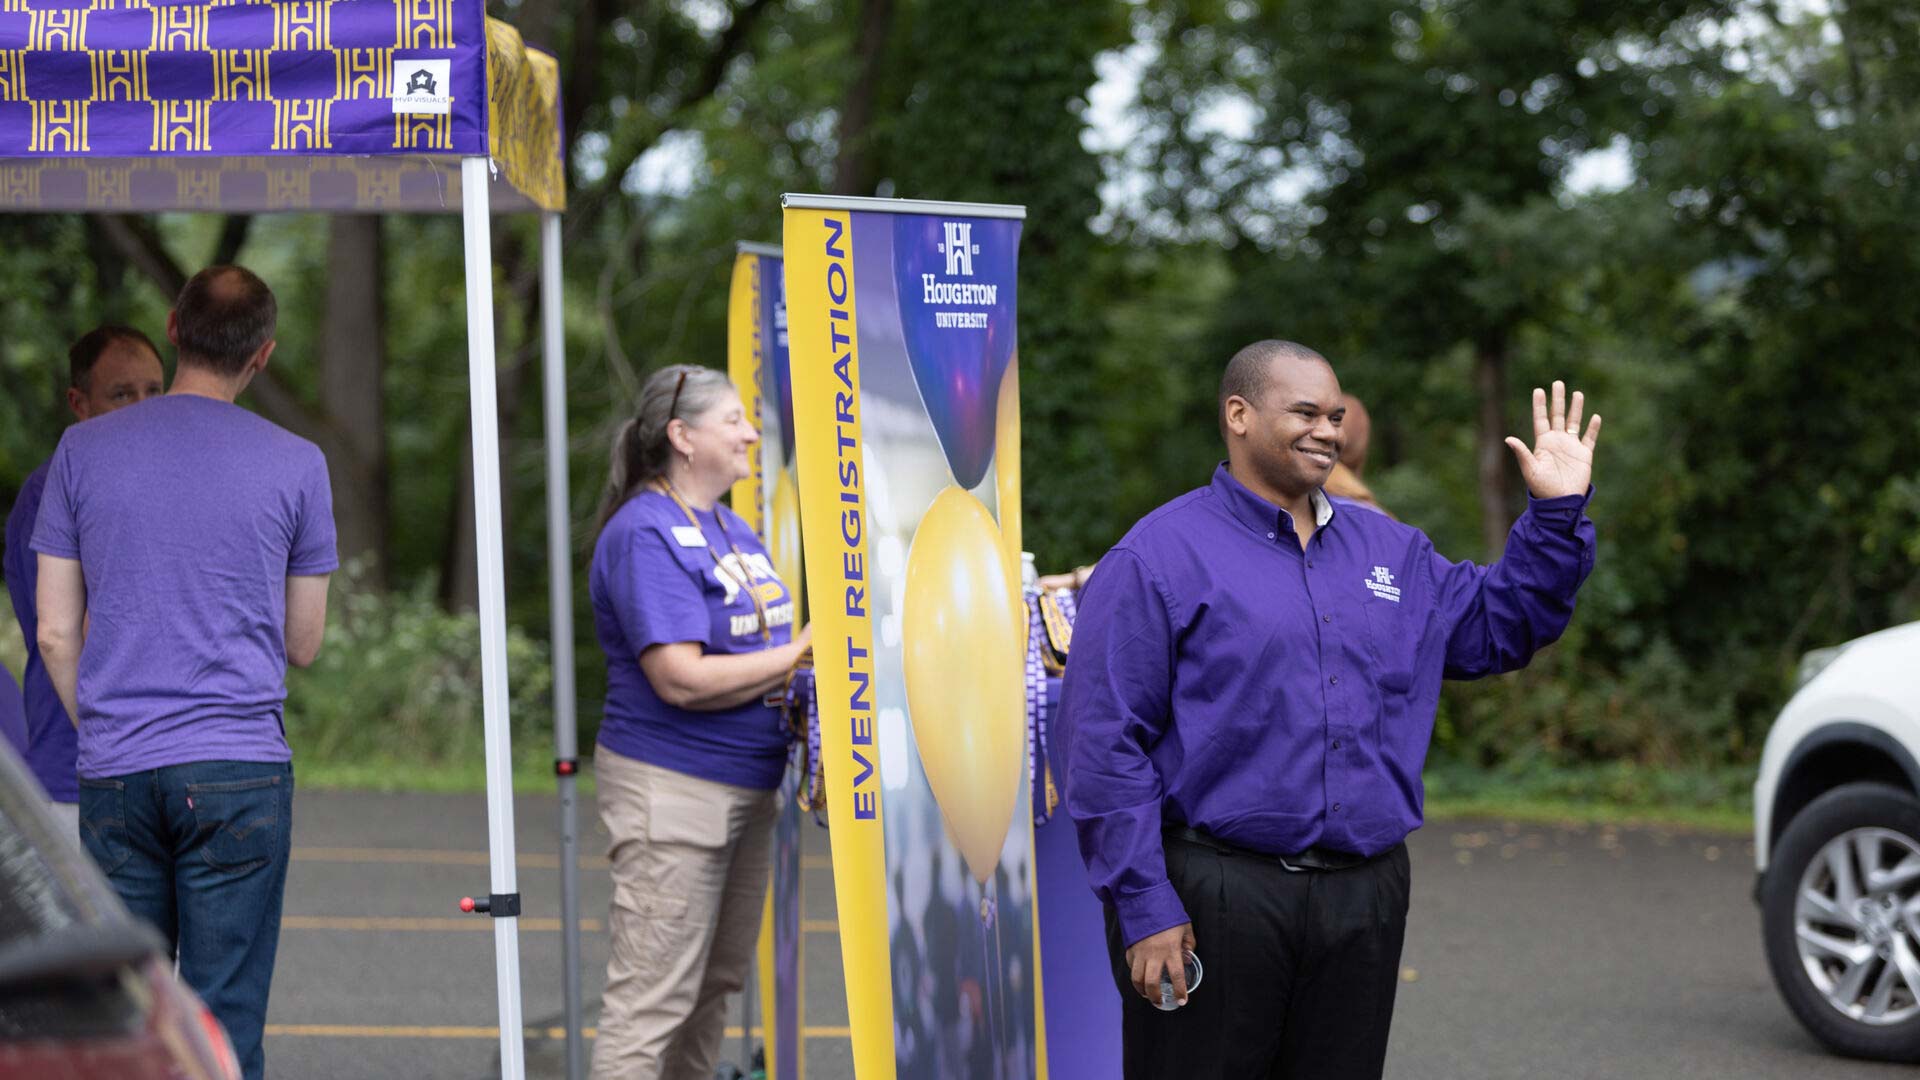 Houghton President Wayne Lewis waving at cars as they come in for move-in day.